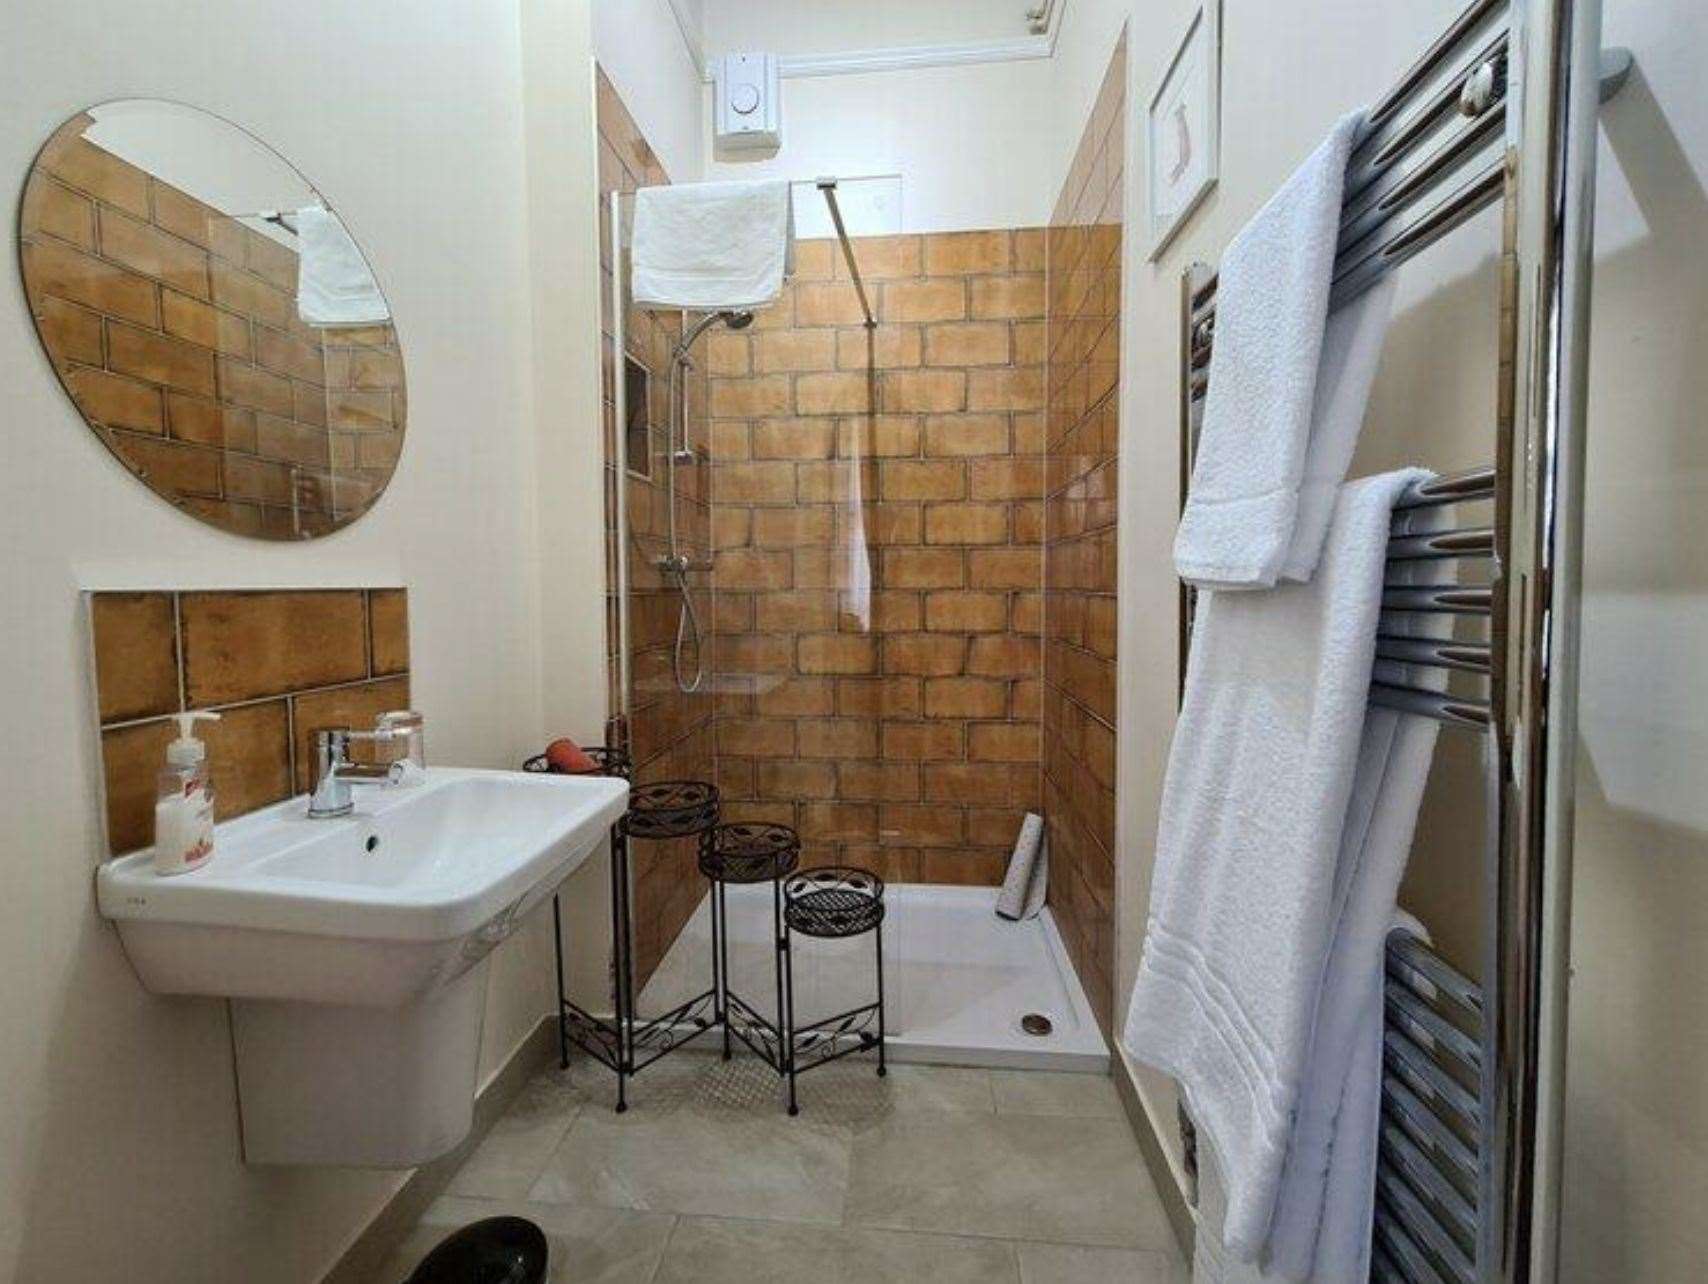 Extensive renovation works included new bathrooms. Picture: Sidney Phillips